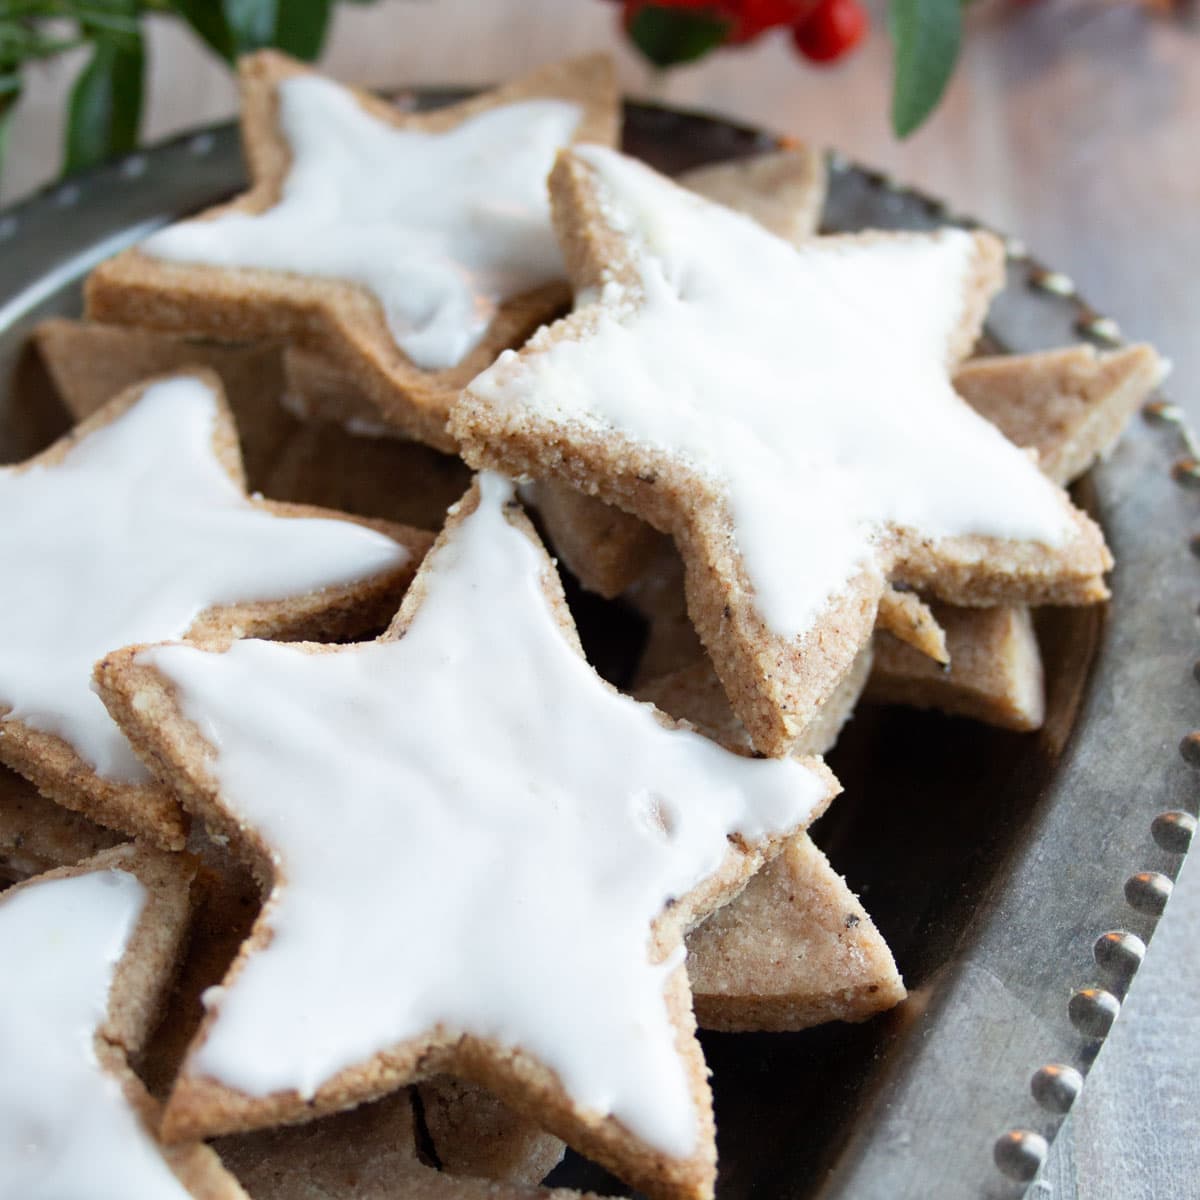 A silver tray with Christmas cookies - stars with white icing.